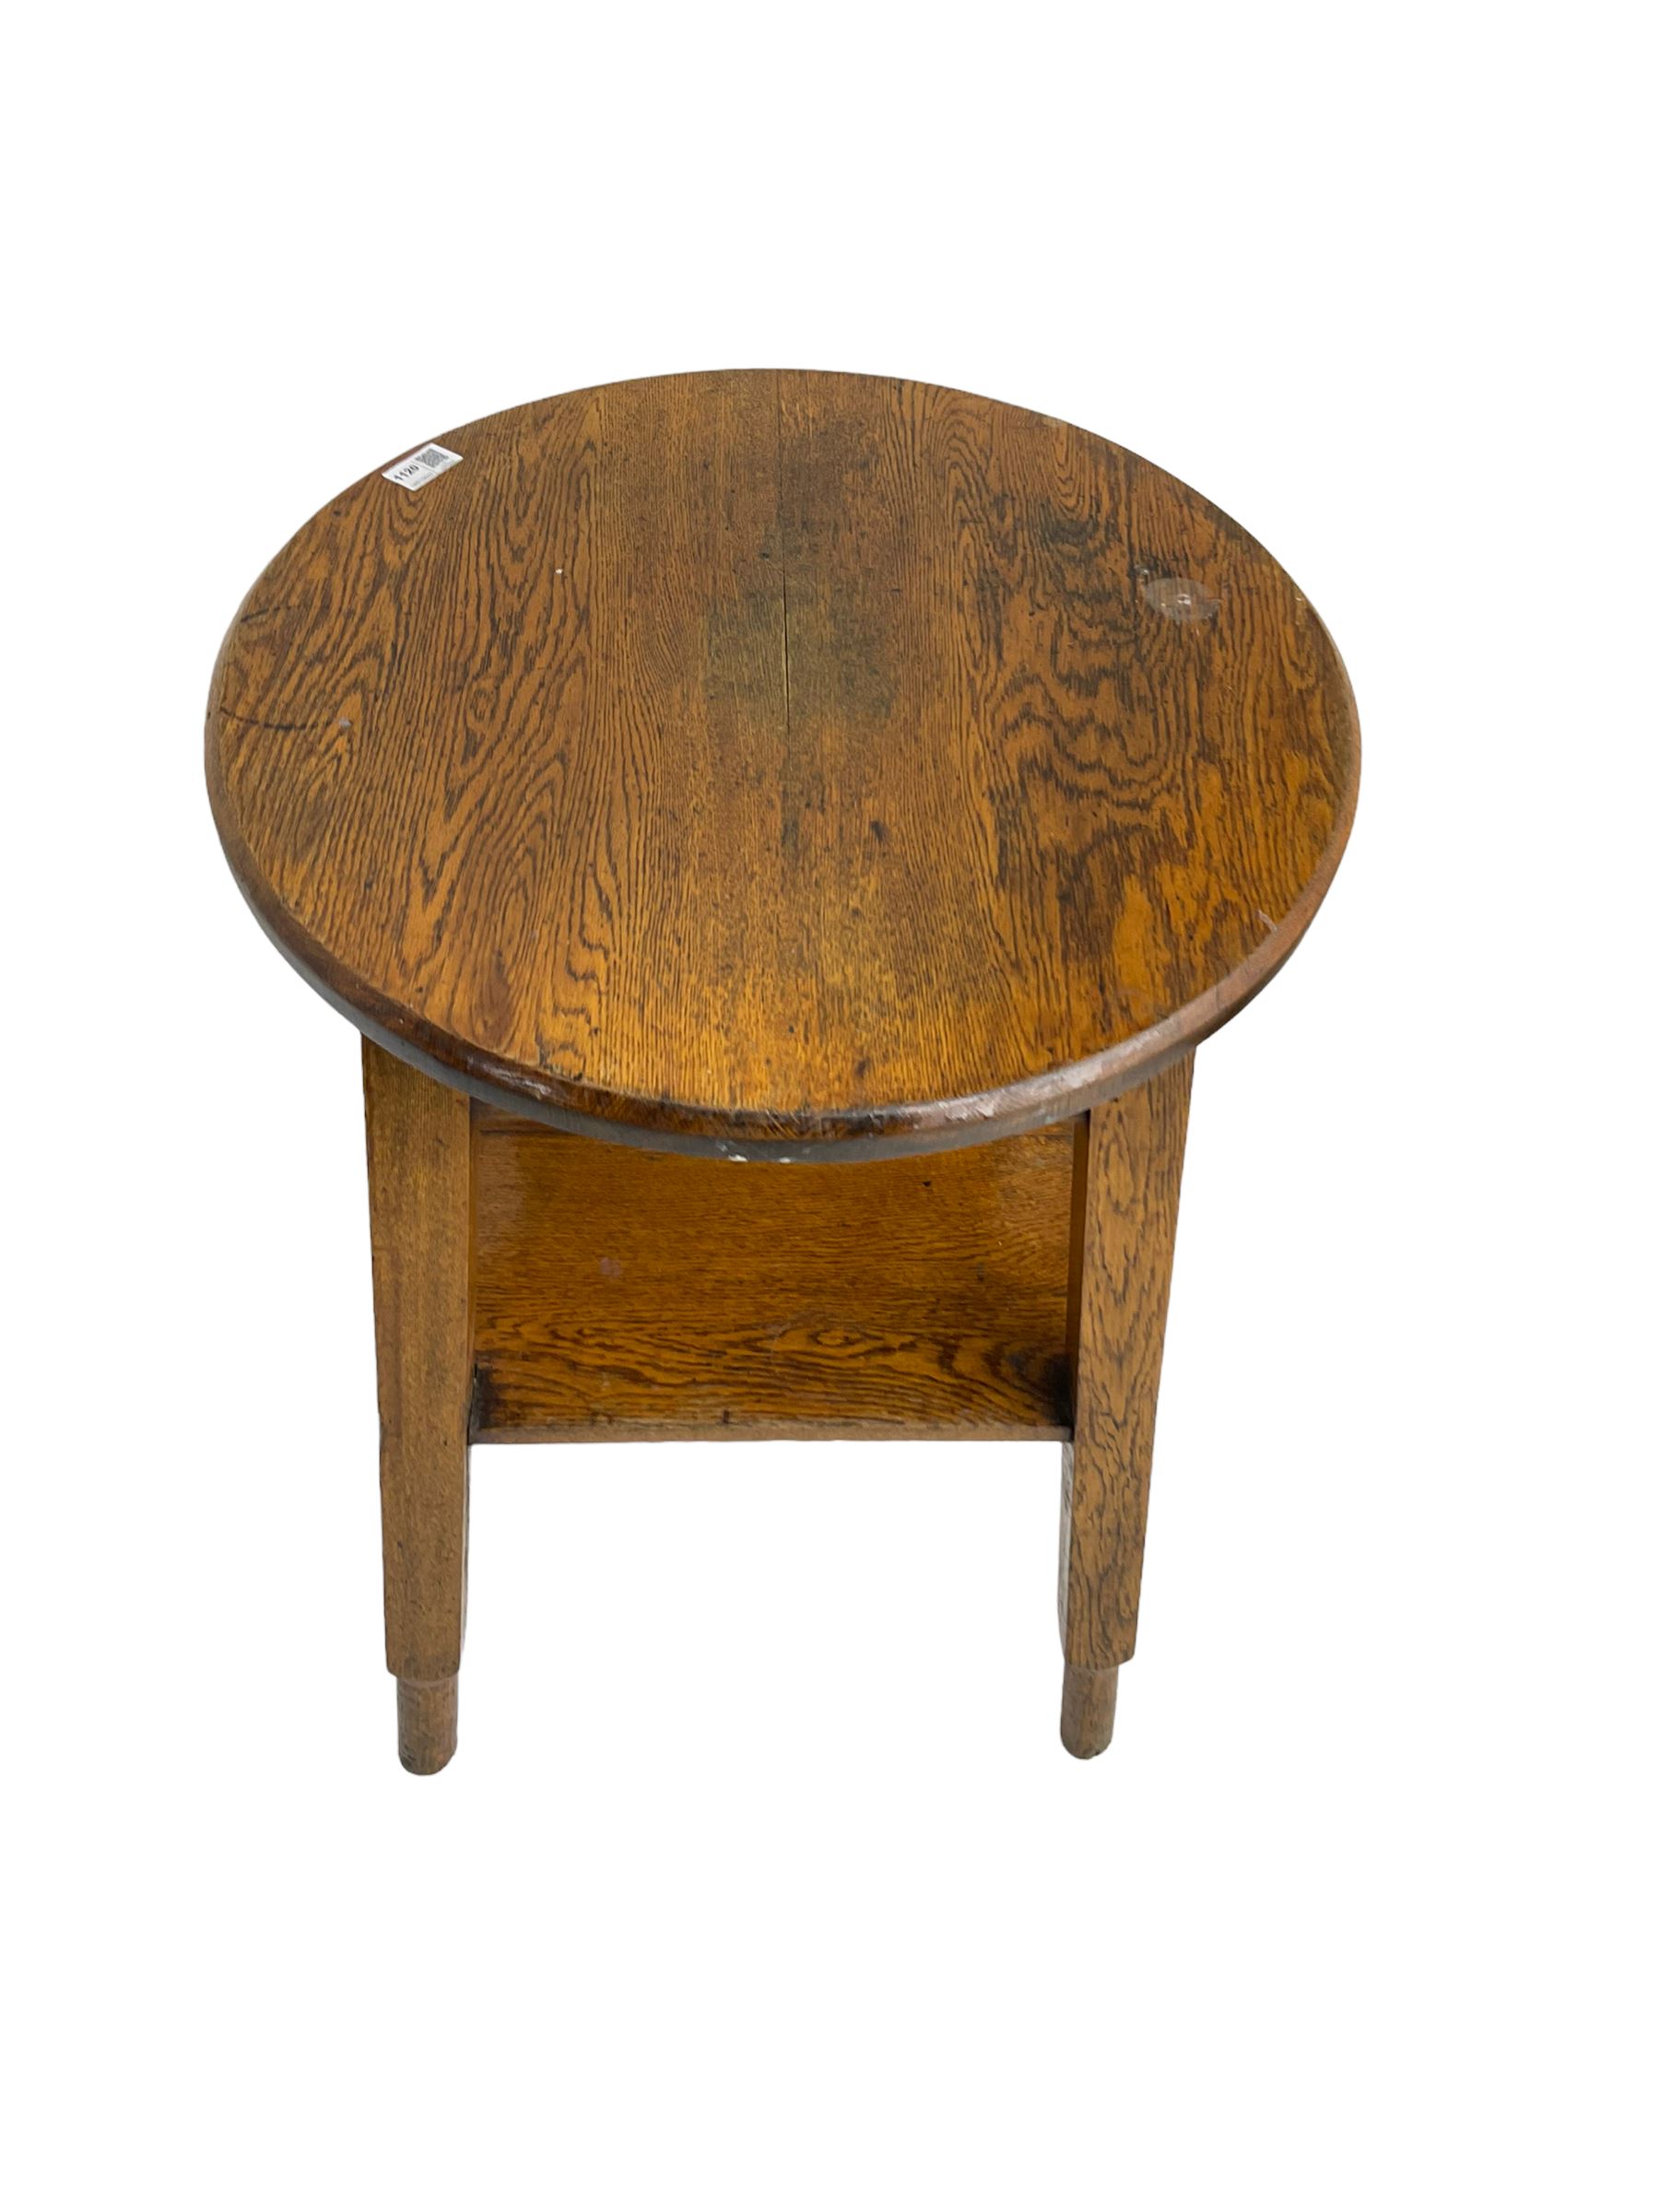 Early to mid-20th century oak tavern table - Image 4 of 4